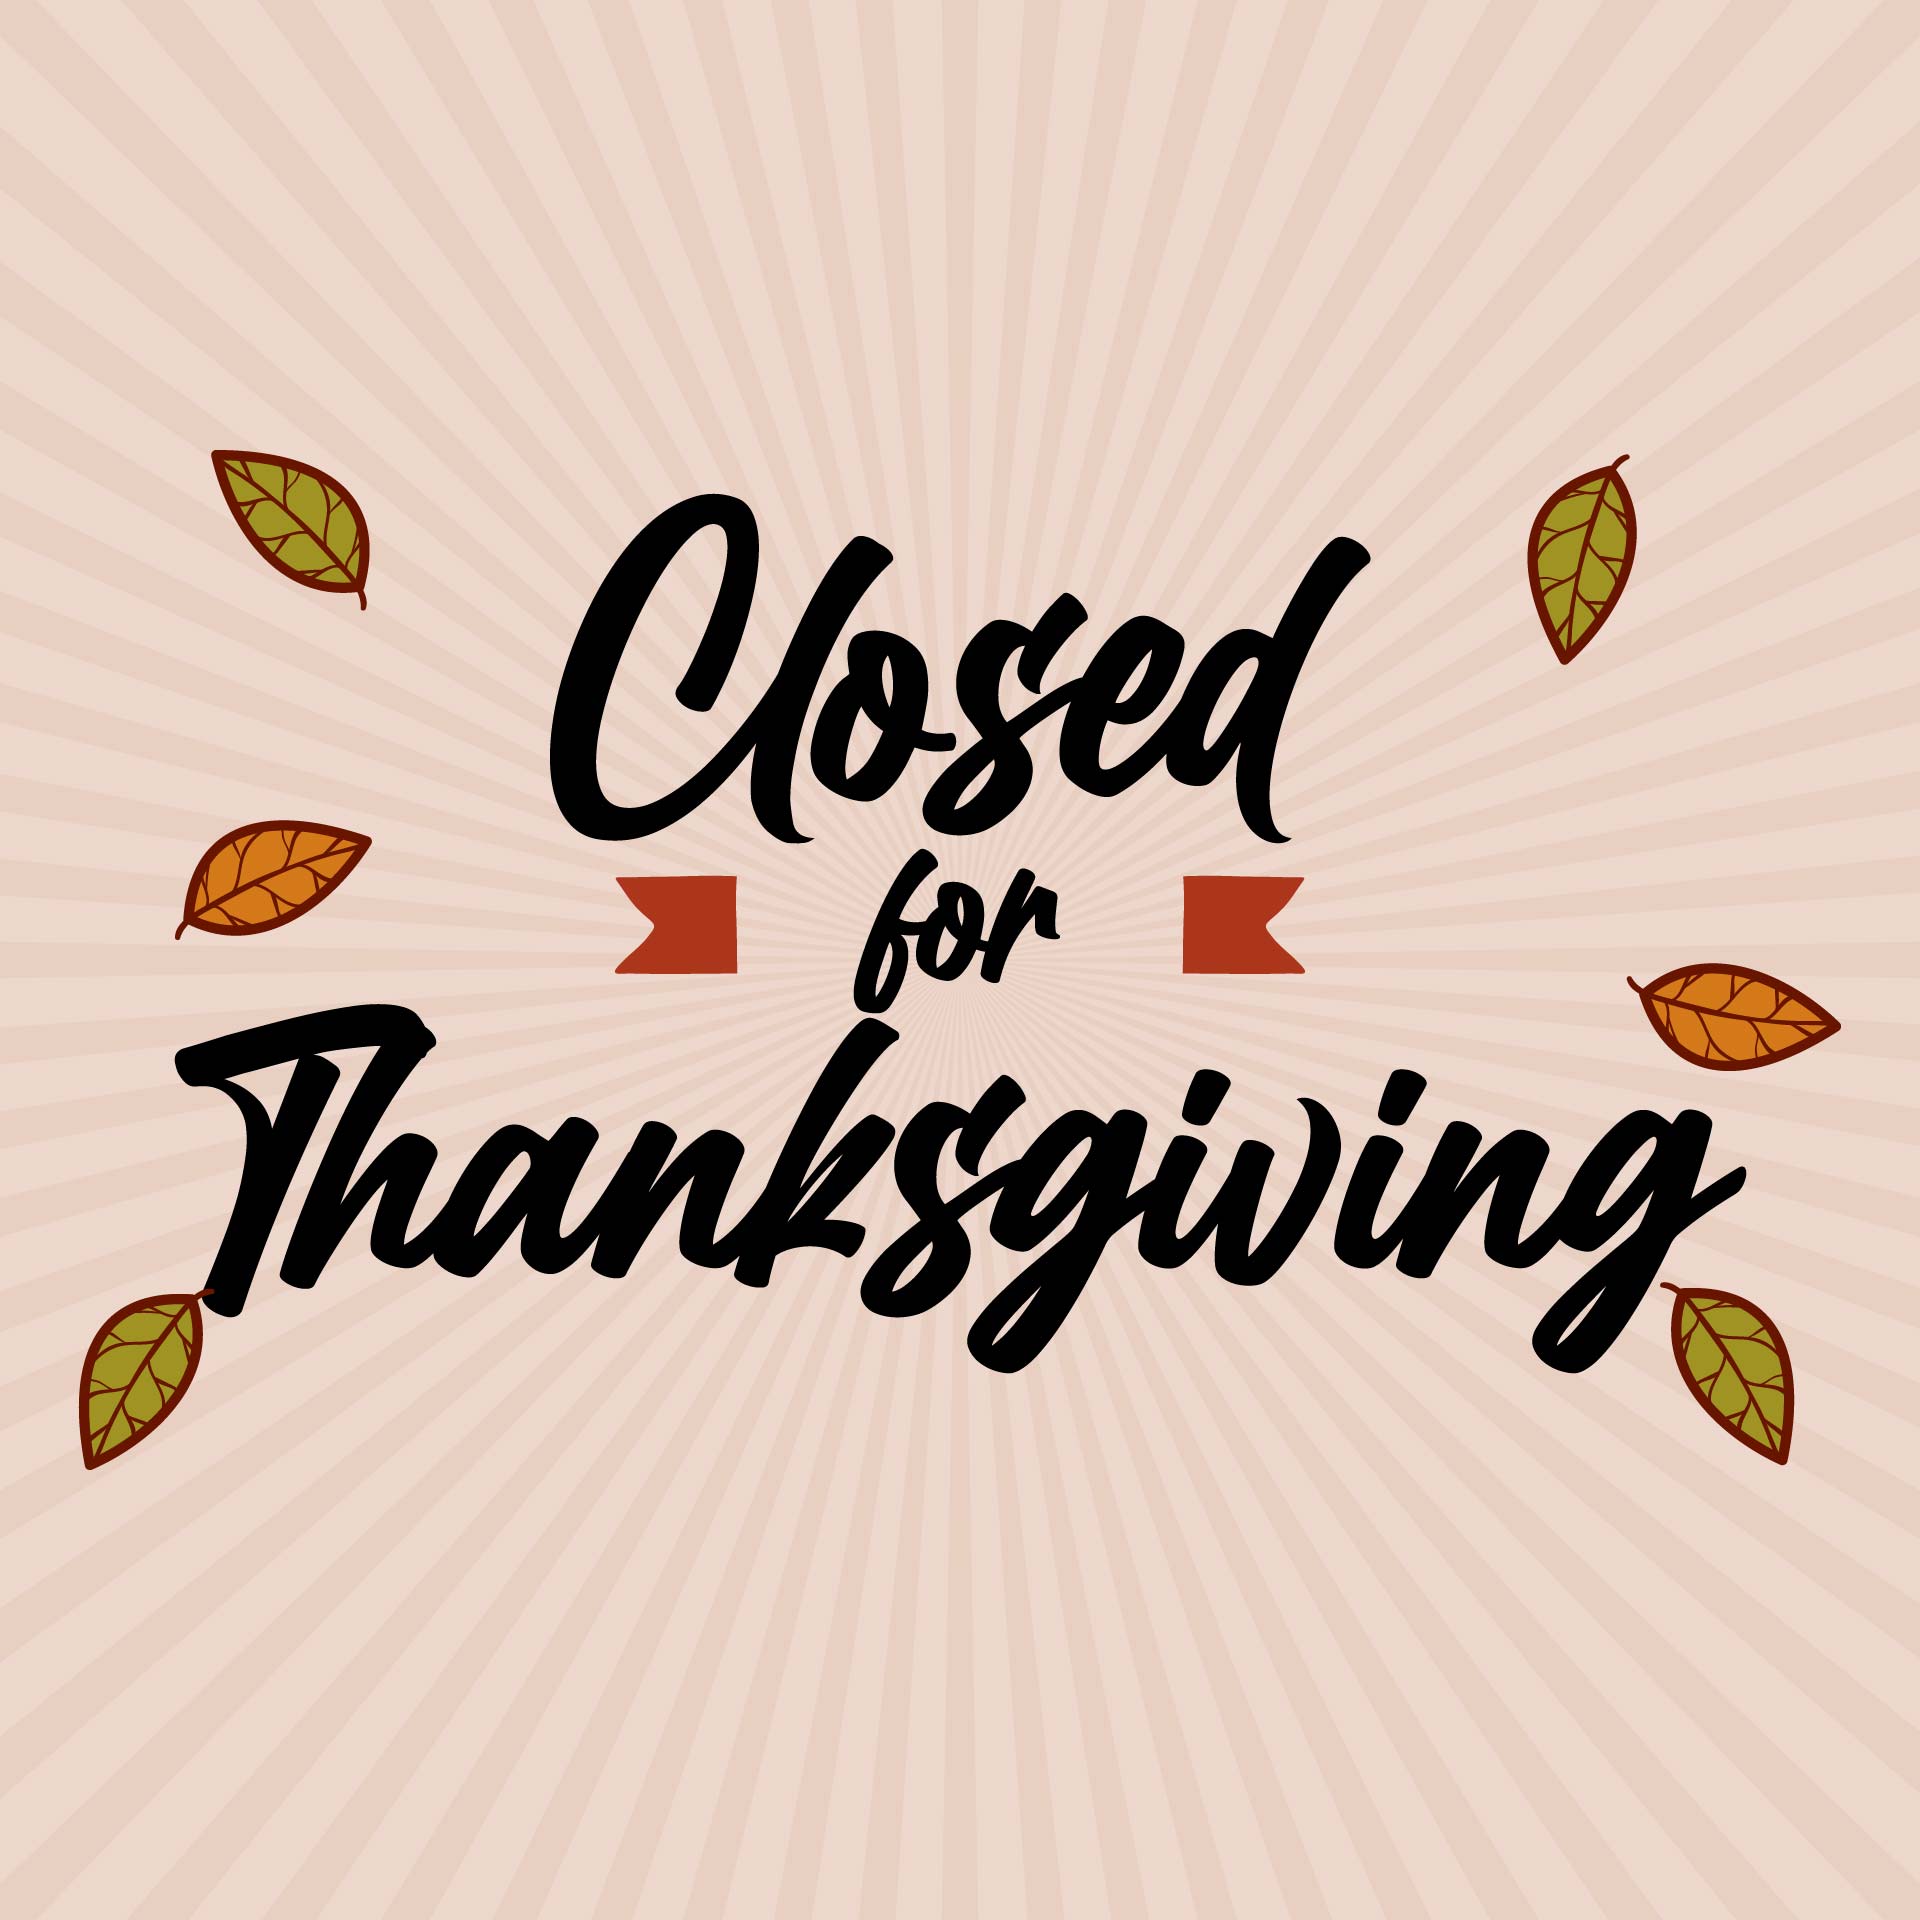 10 Best Closed For Thanksgiving Printables